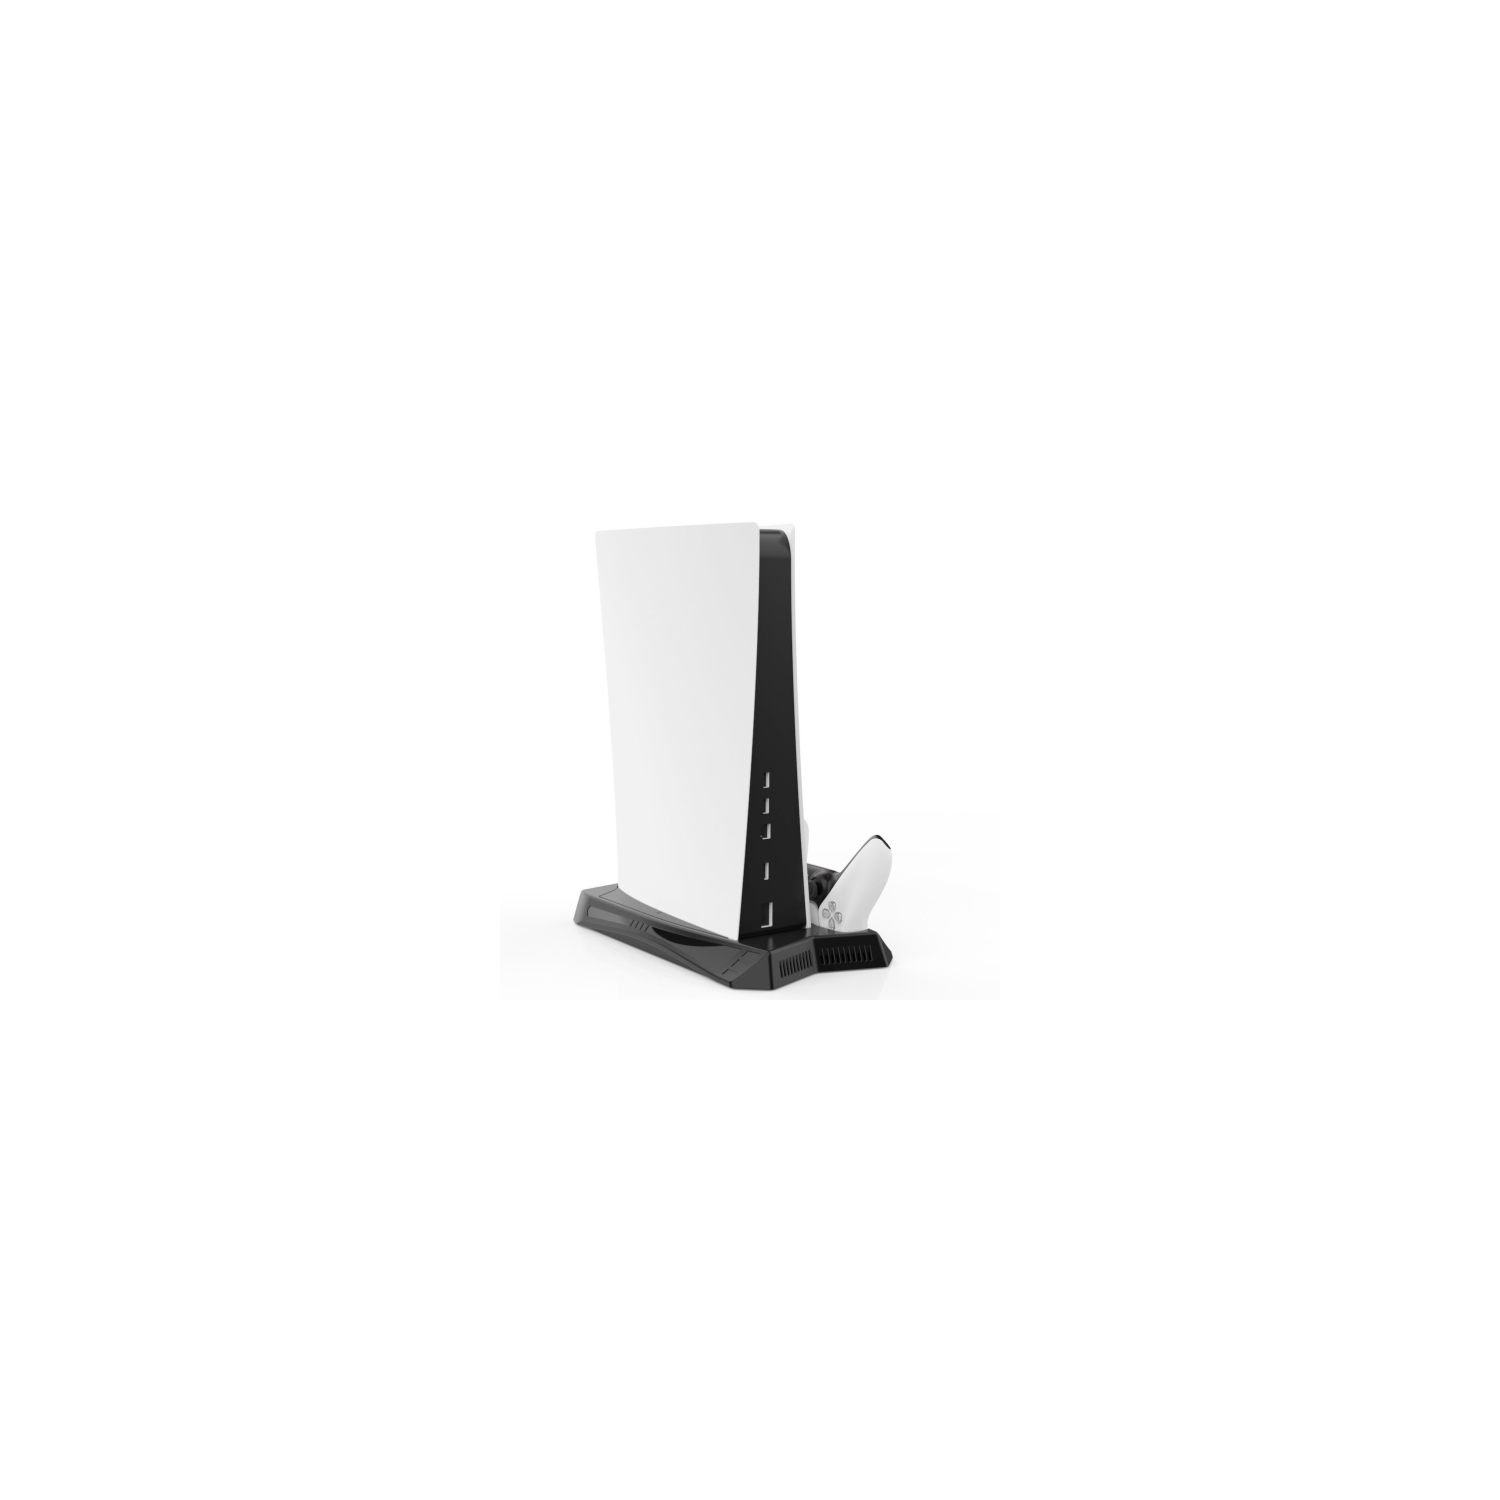 3-in-1 Vertical Stand with 2 Cooling Fan and Charging Station Dock for PS5 Console and PlayStation 5 Digital Edition, Dual Controller Charger Ports